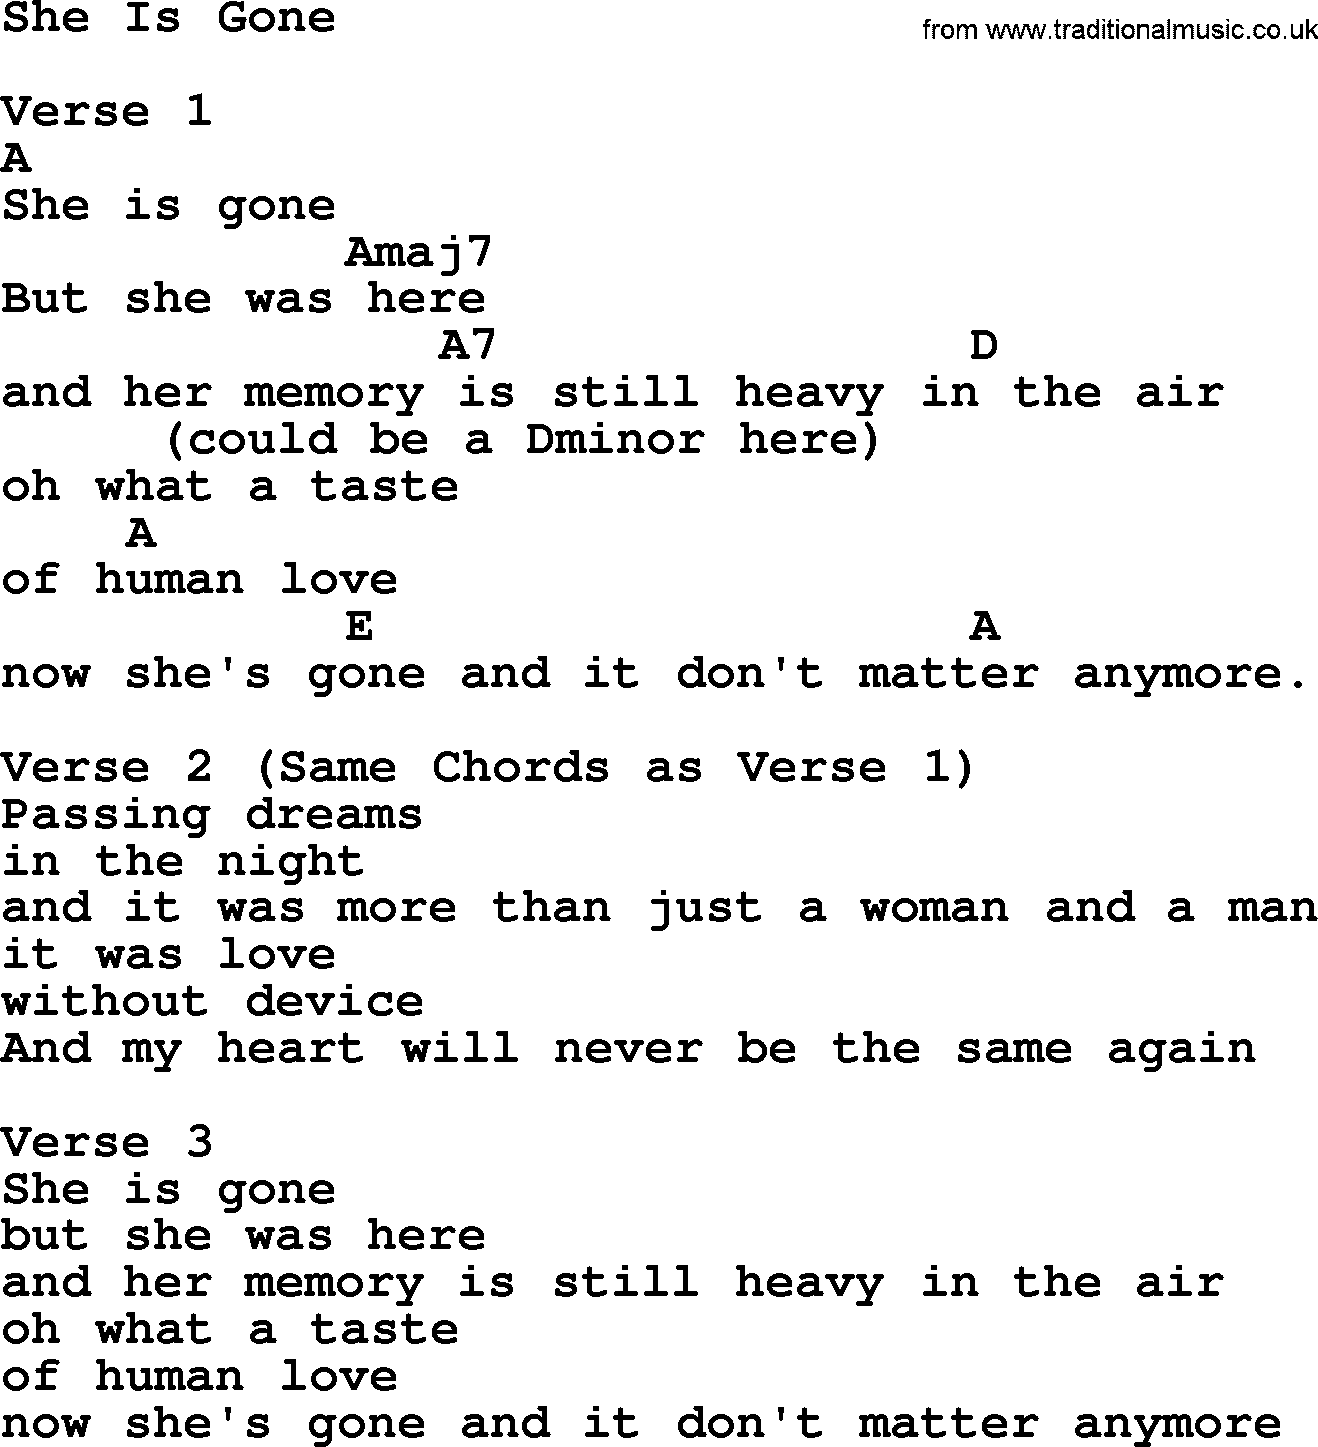 Willie Nelson song: She Is Gone, lyrics and chords